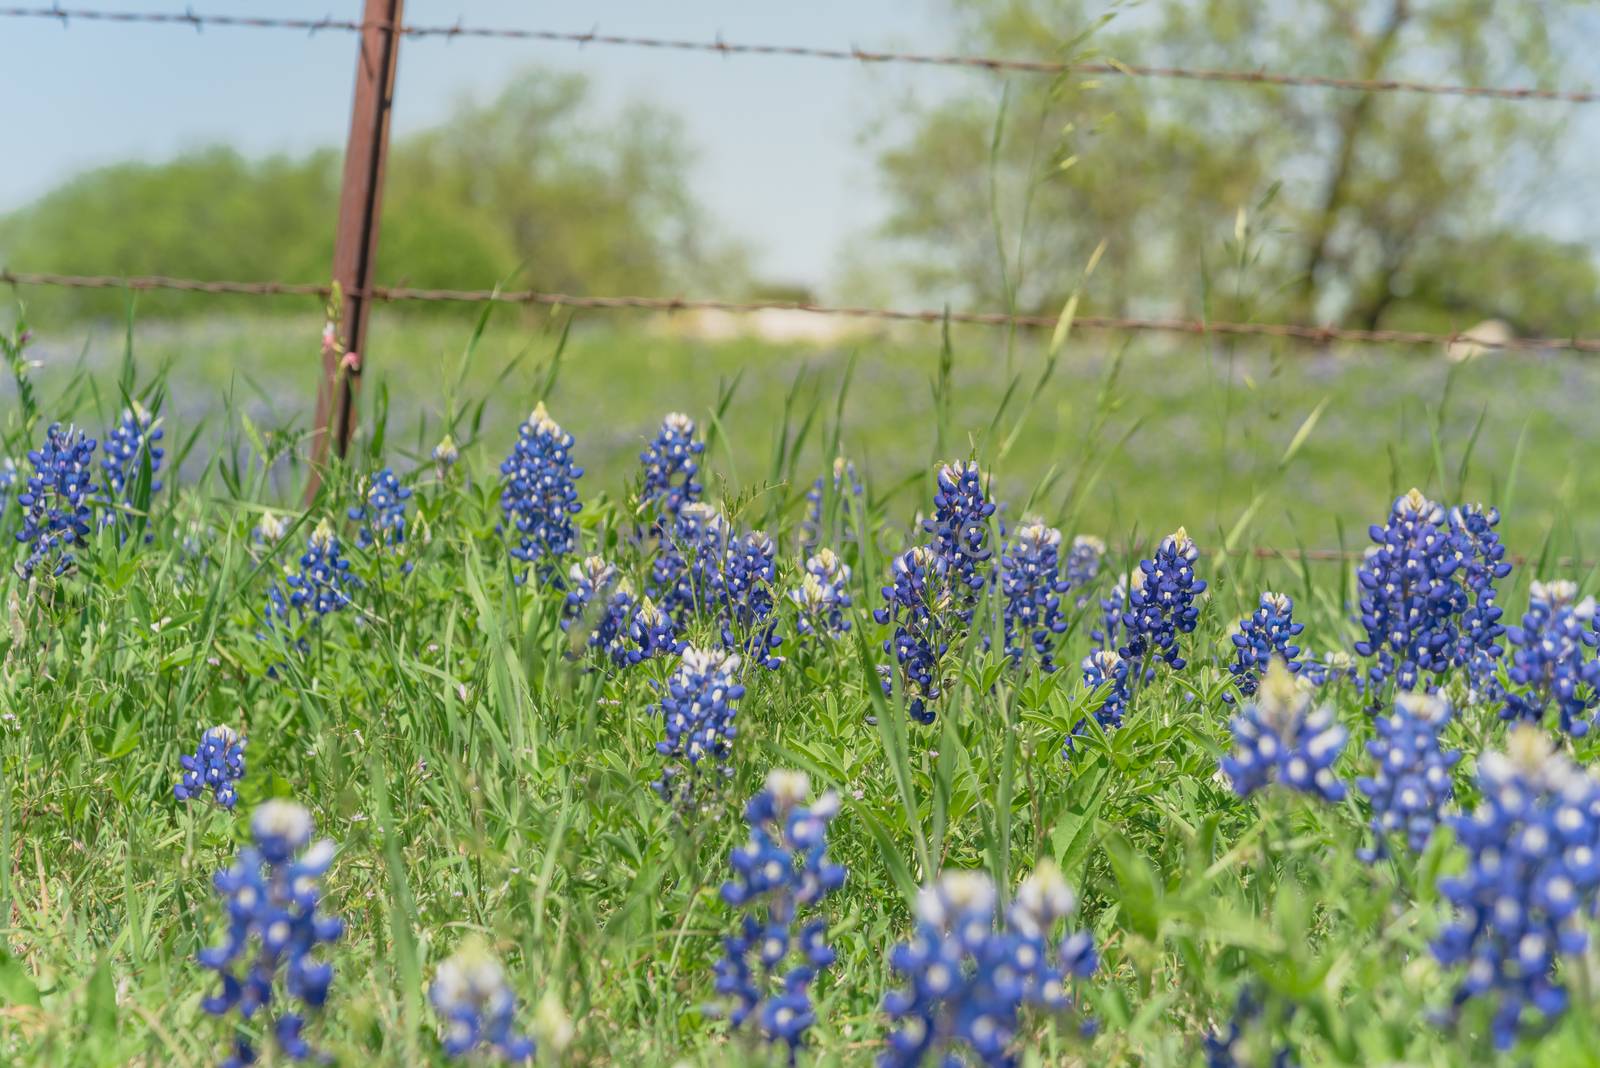 Close-up selective focus of Bluebonnet wildflower blooming in countryside Bristol, Texas. Colorful state flower of Texas blossom with blurry farm barbed wire fence in background